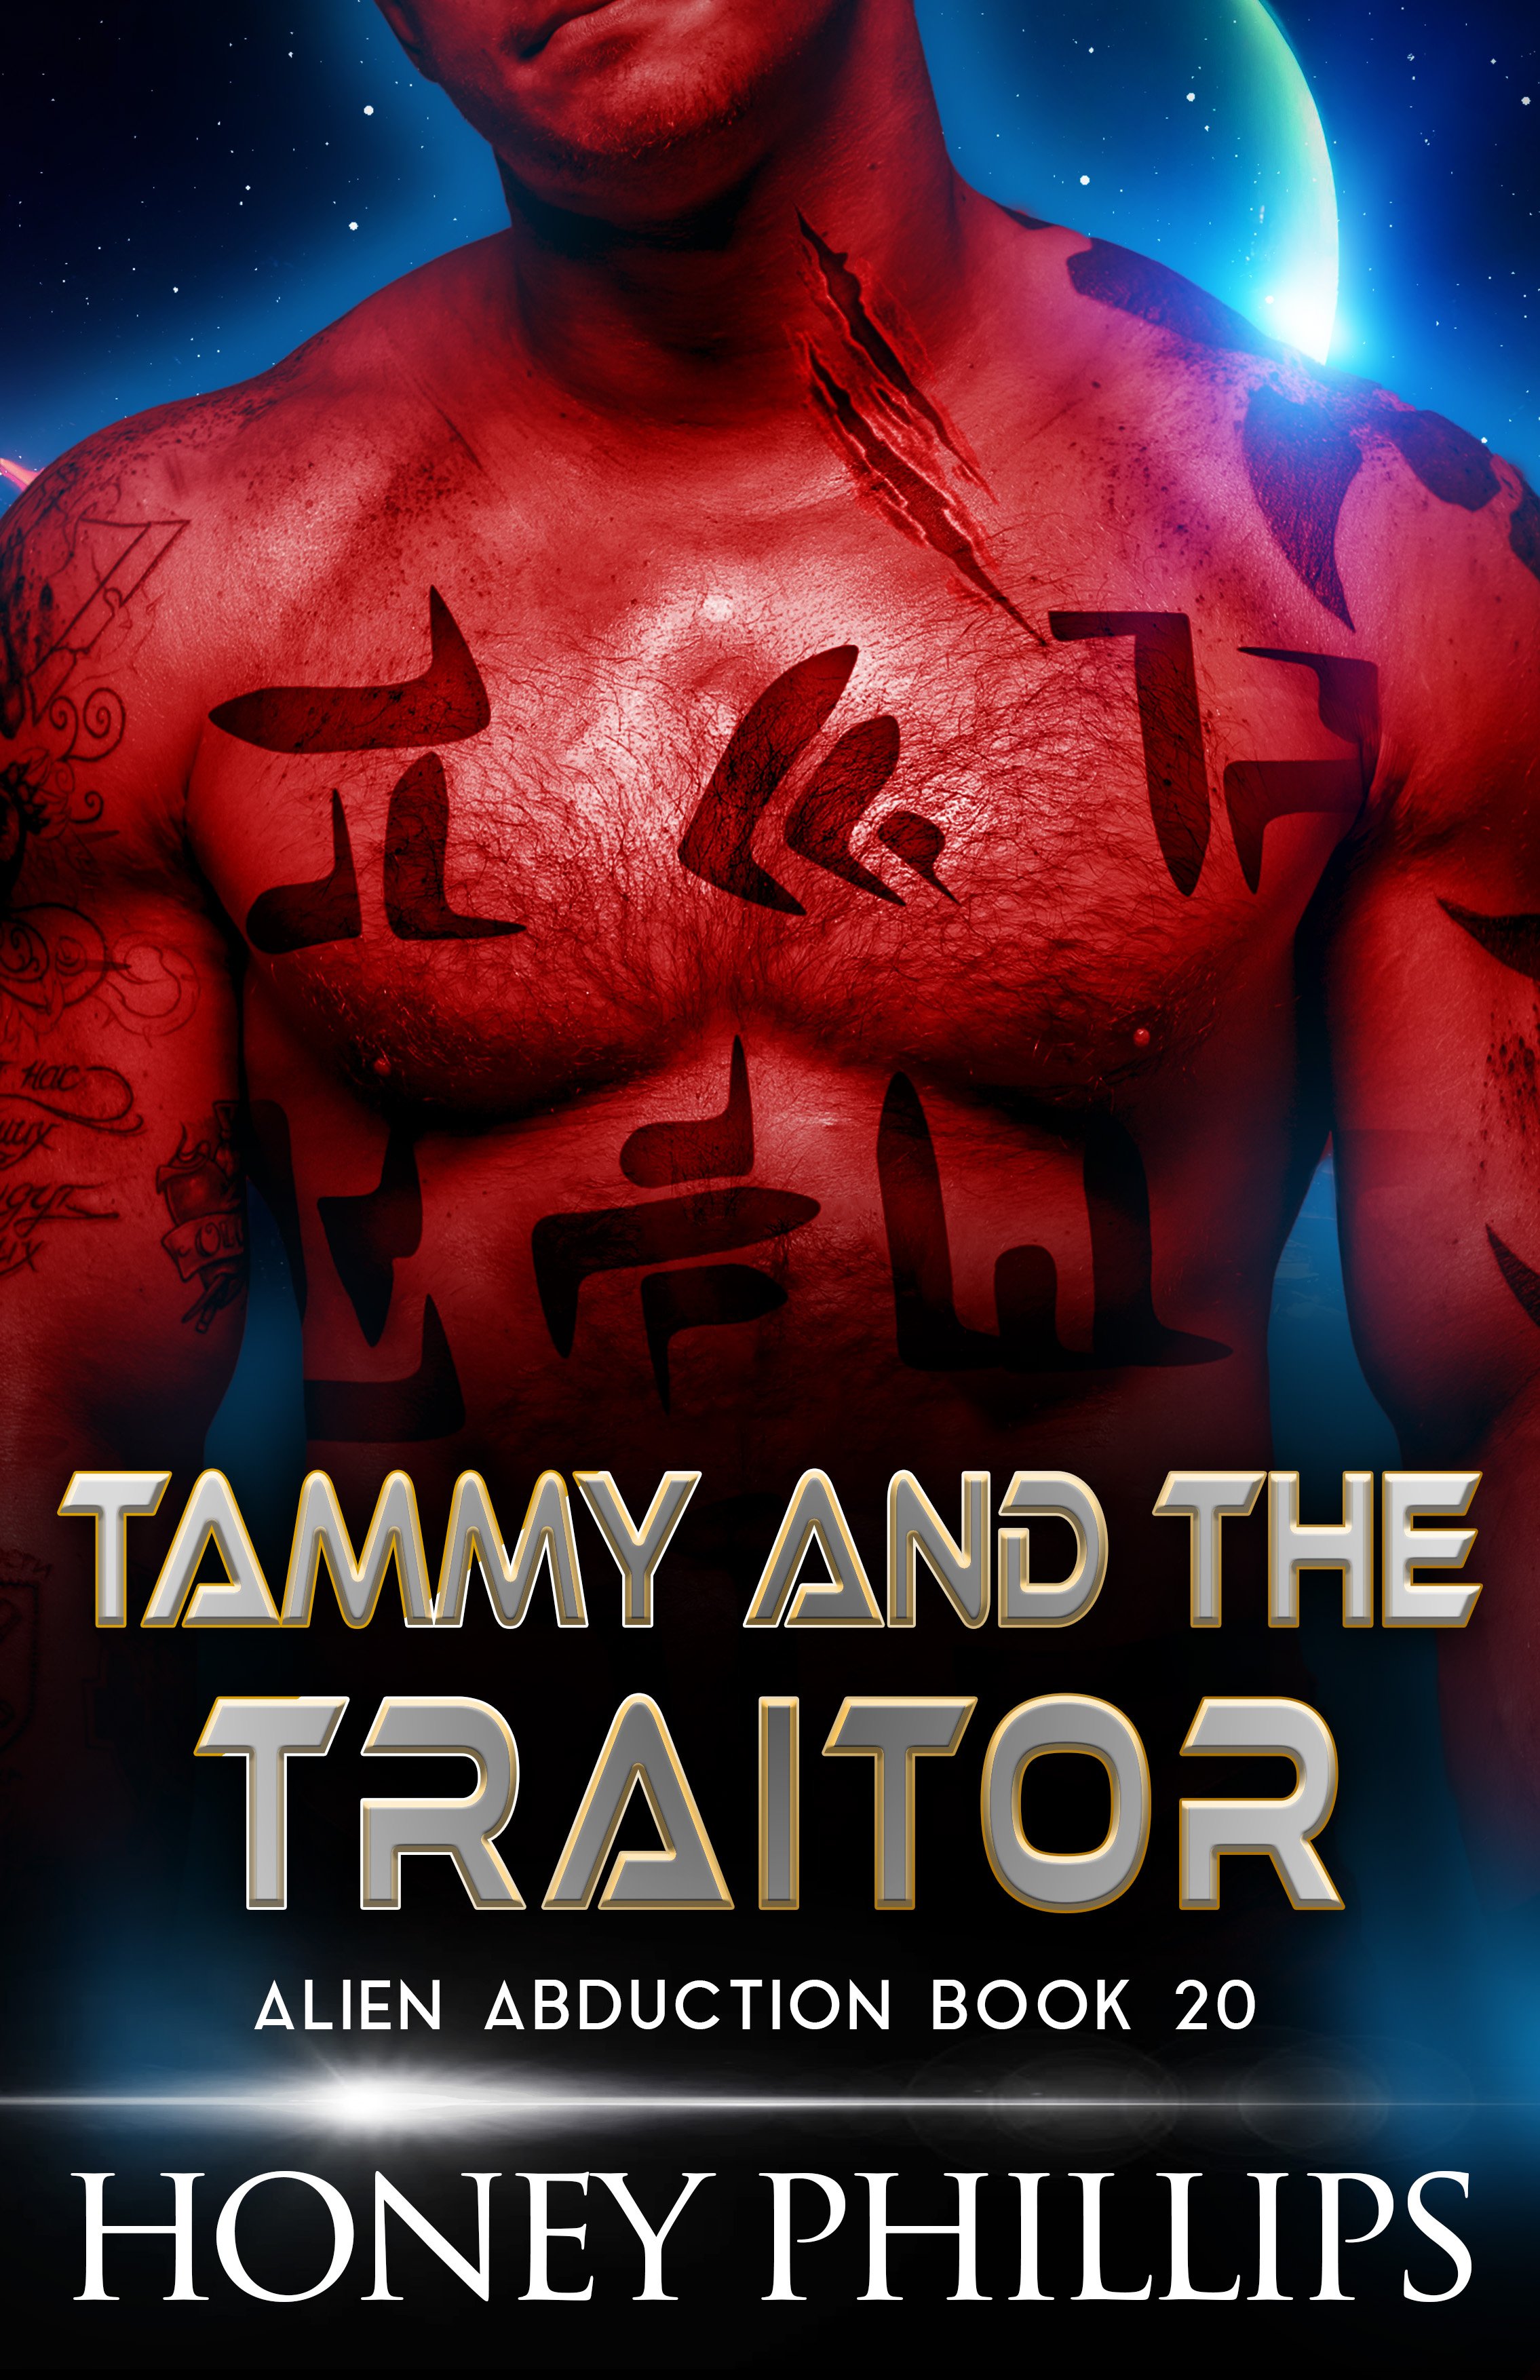 Tammy and the Traitor (1).jpg